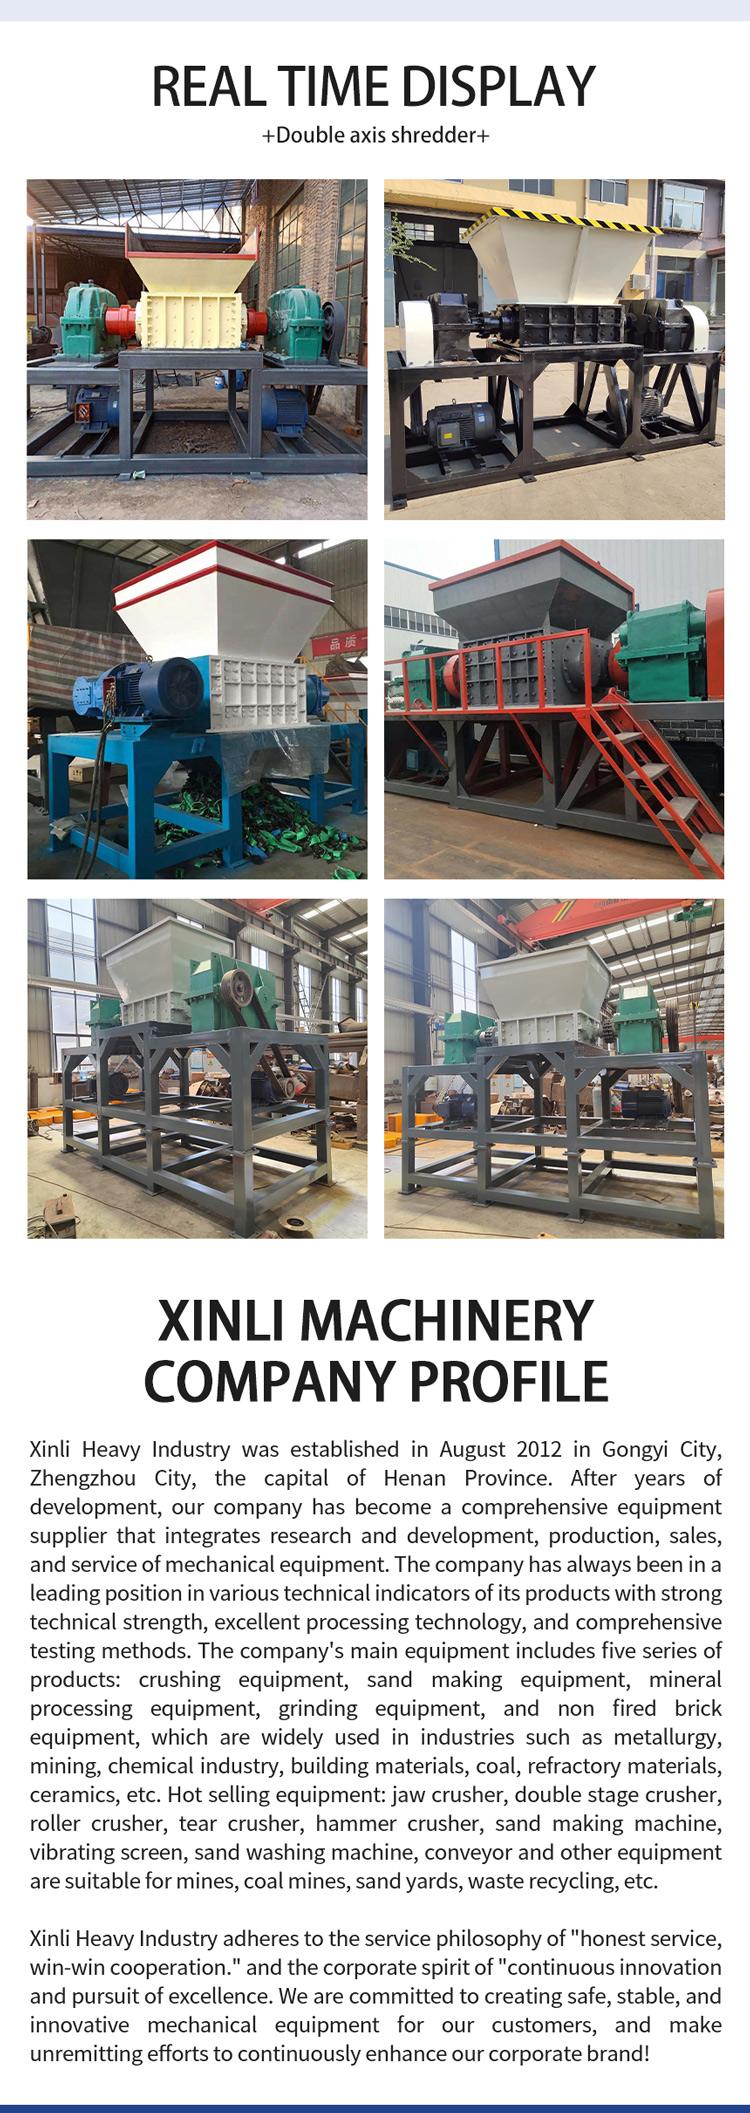 Xinli Heavy Industry Multi material Waste Recycling and Tearing Machine